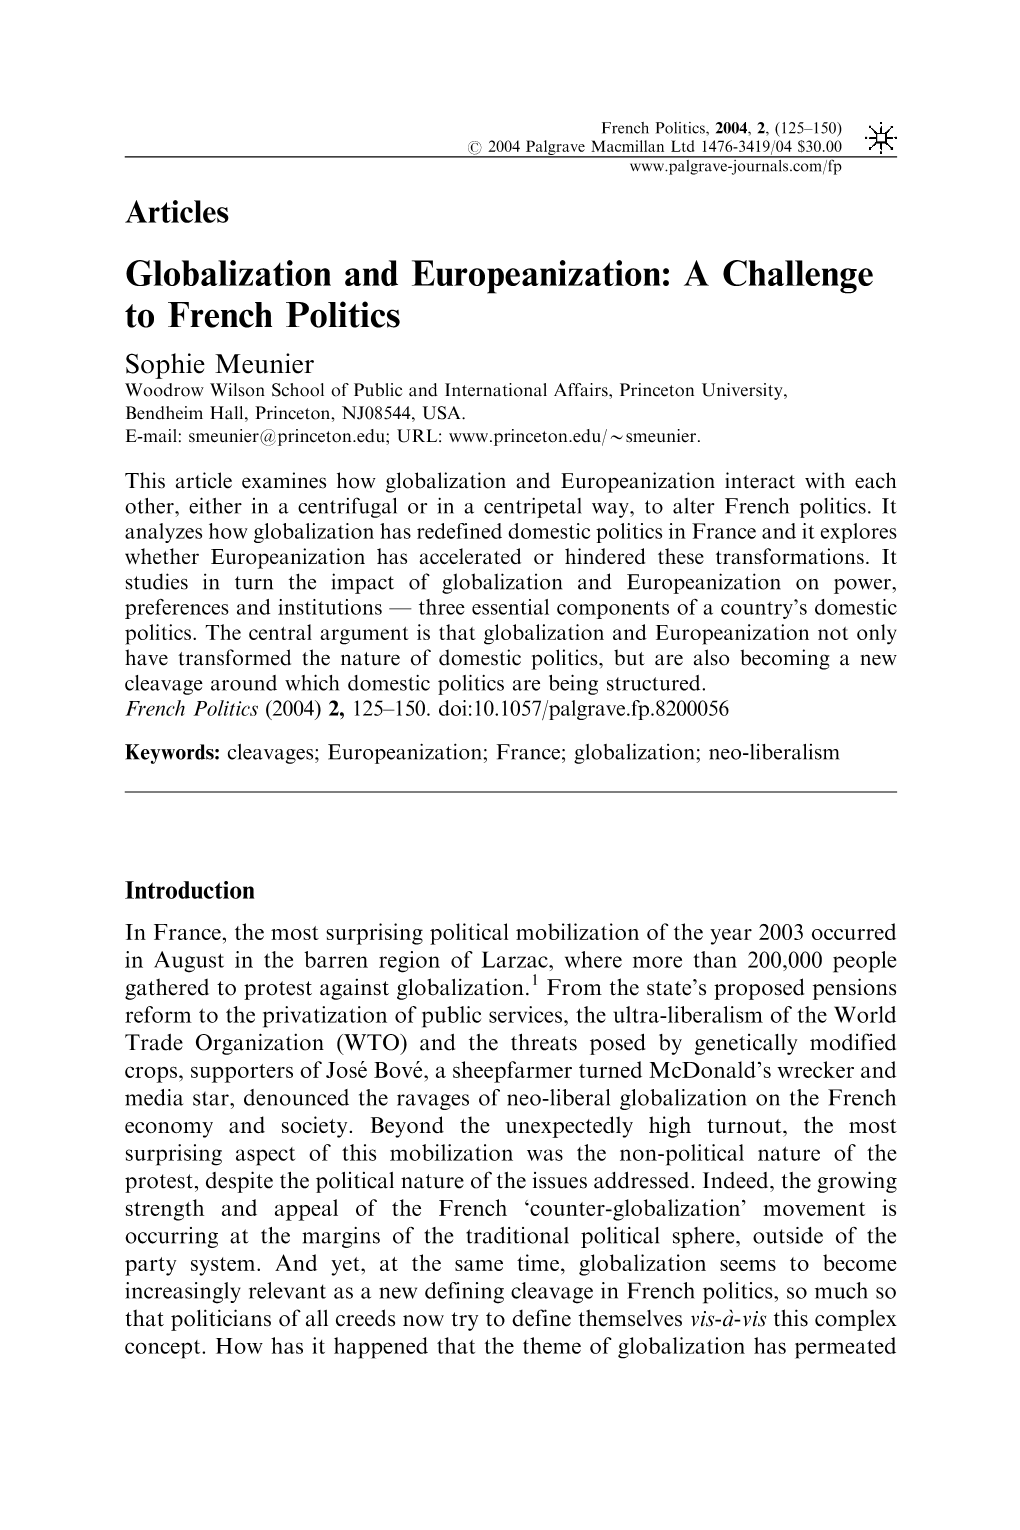 Globalization and Europeanization: a Challenge to French Politics